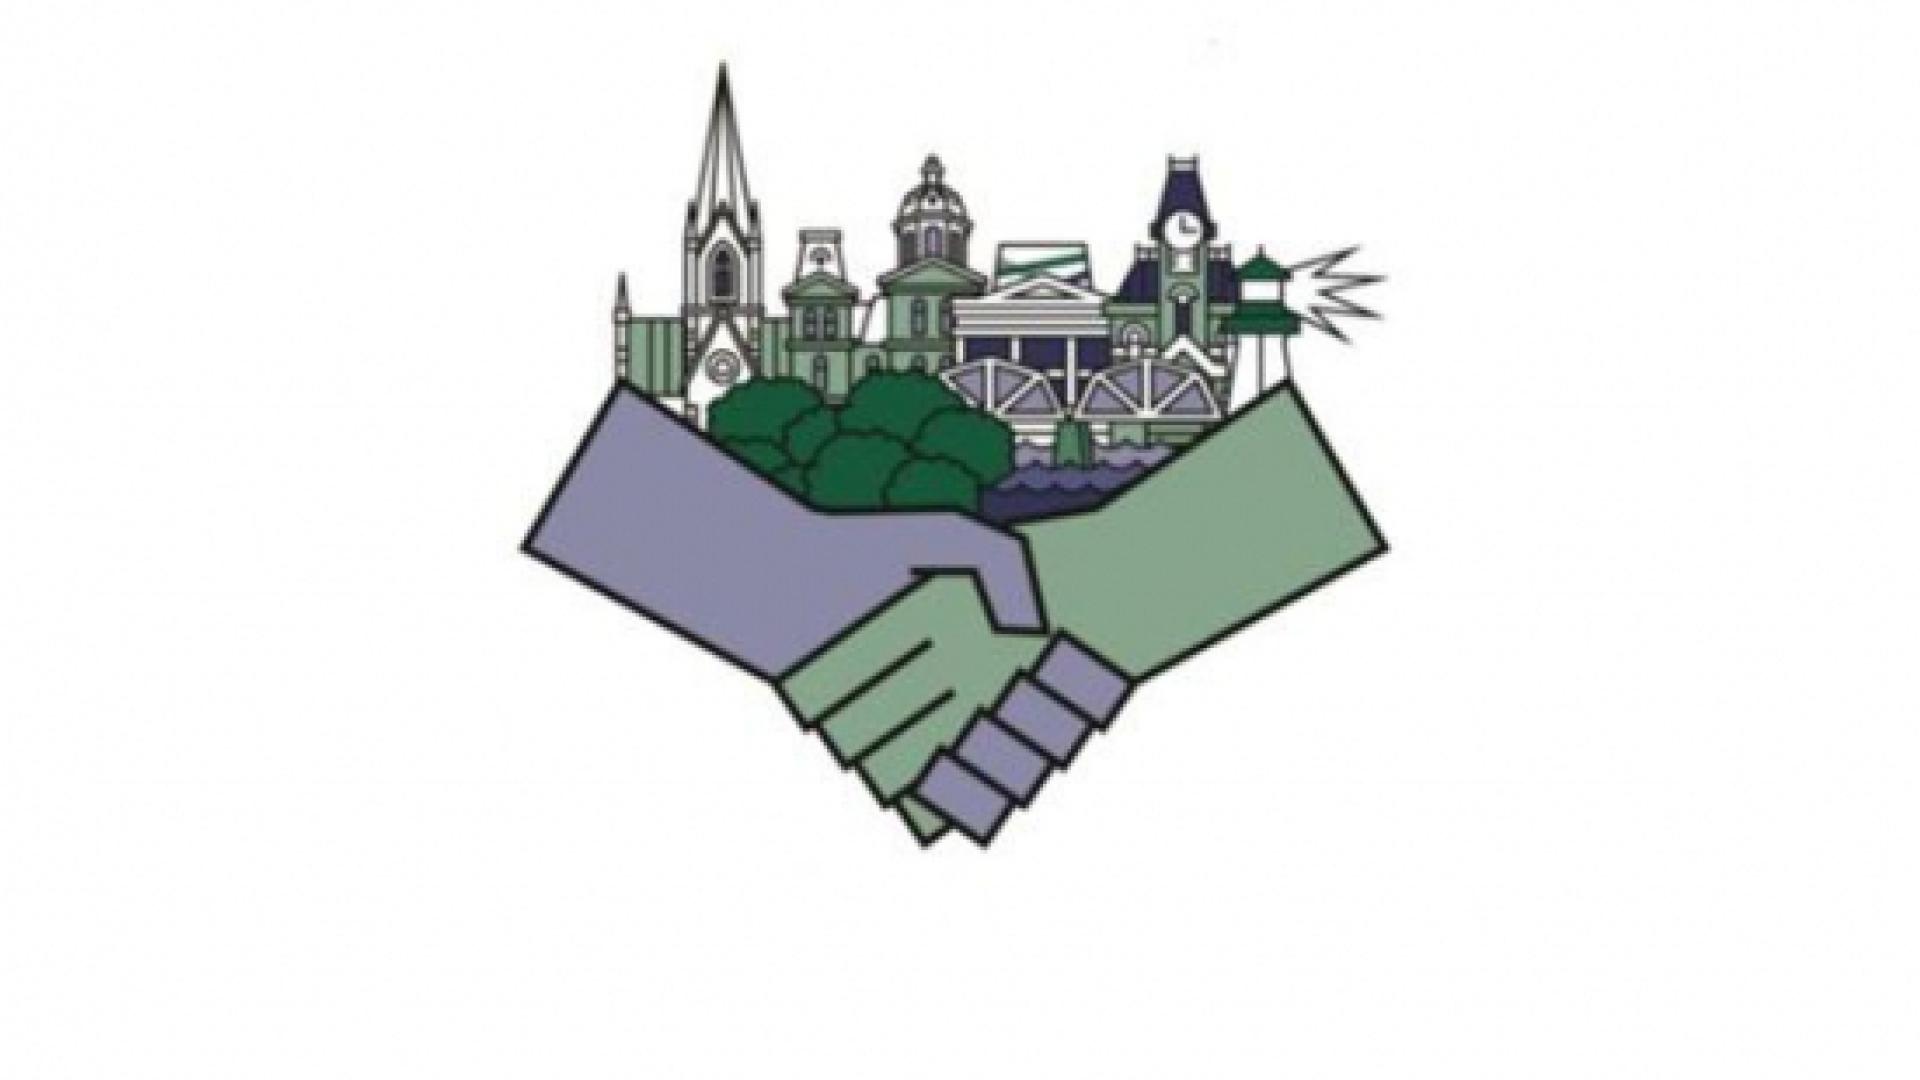 Illustration of two hands shaking hands in front of a city hall